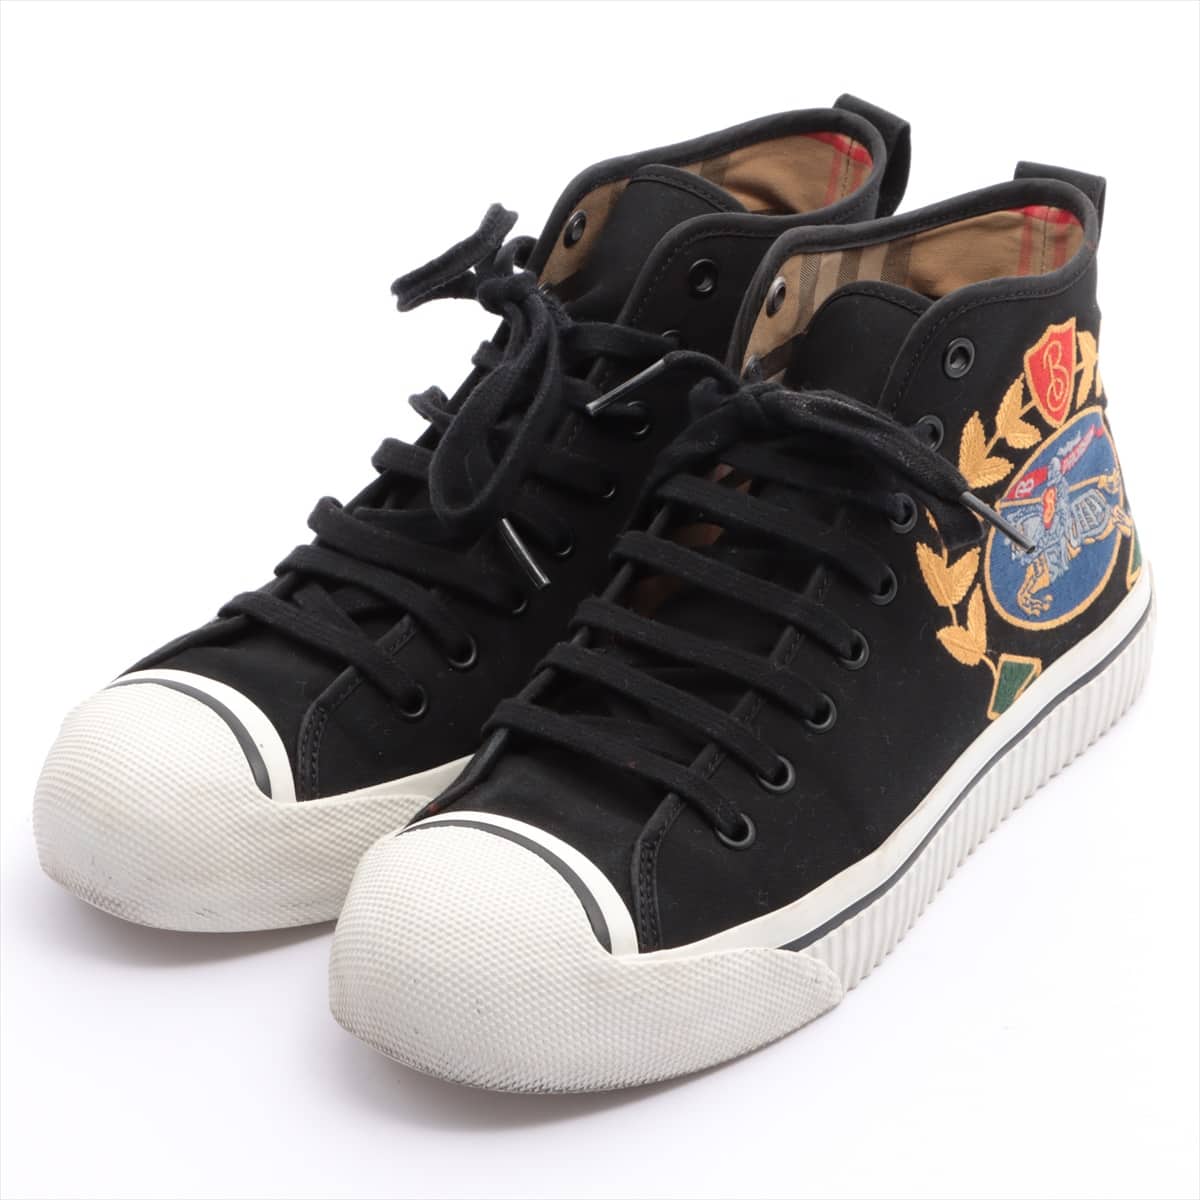 Burberry 18AW canvas High-top Sneakers 40 Men's Black KINGLY BIG C HIGH-TOP SNEAKER